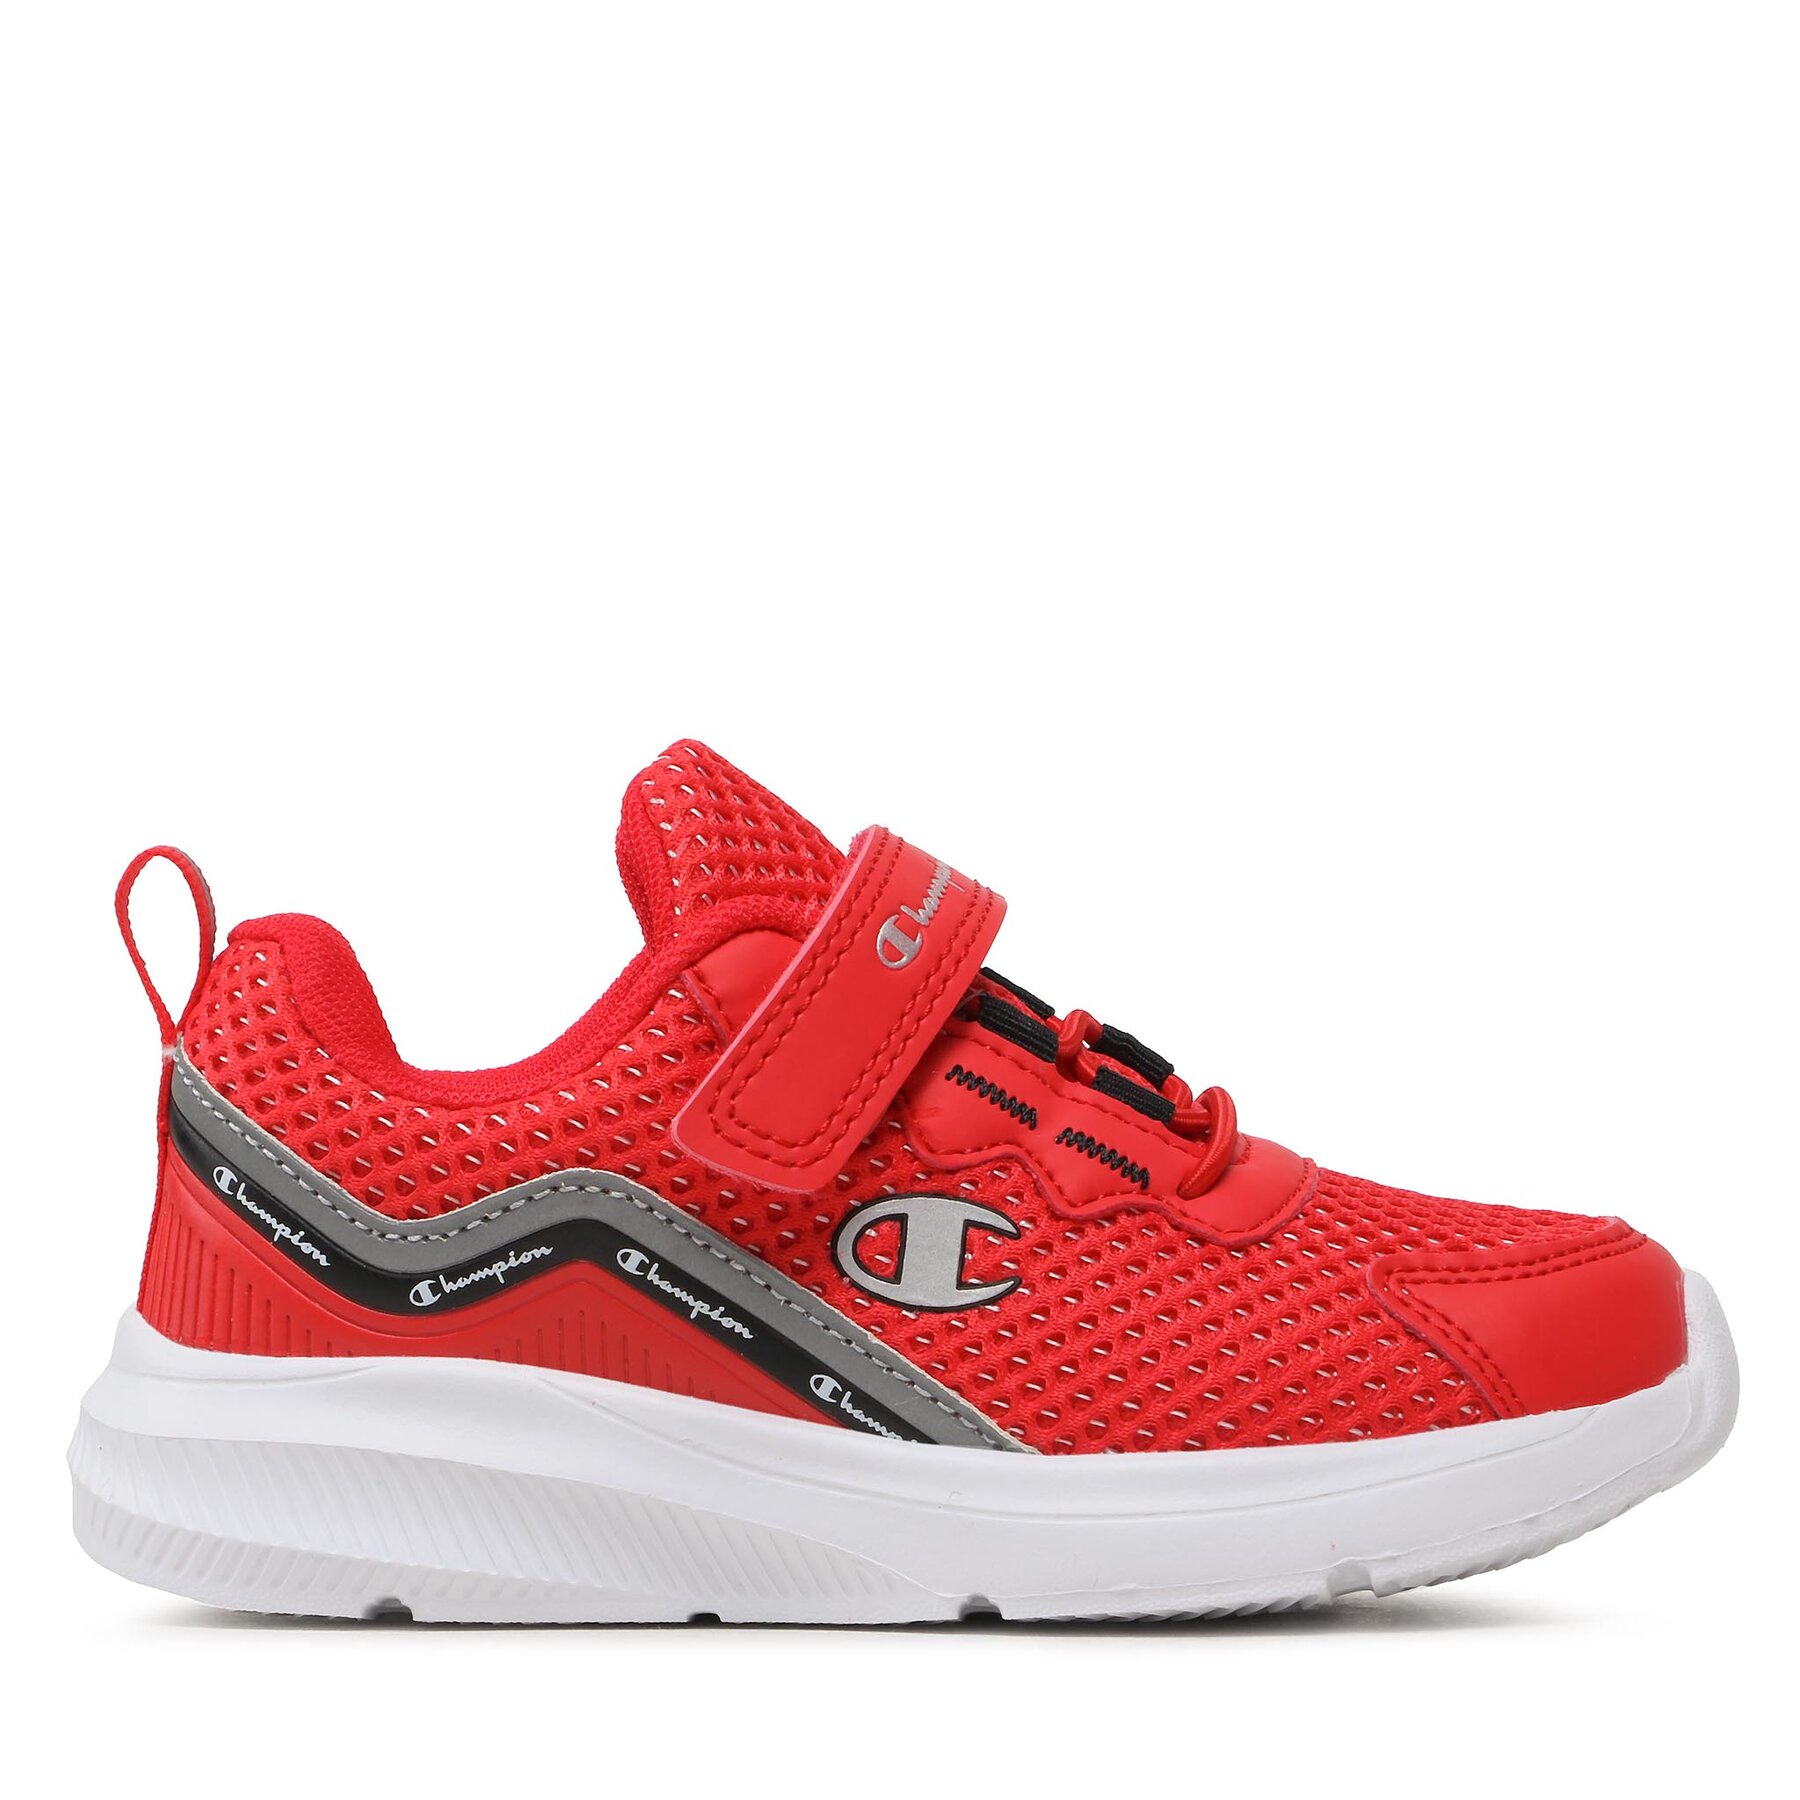 Sneakers Champion Shout Out B Ps S32662-RS001 Red/Wht/Nbk von Champion